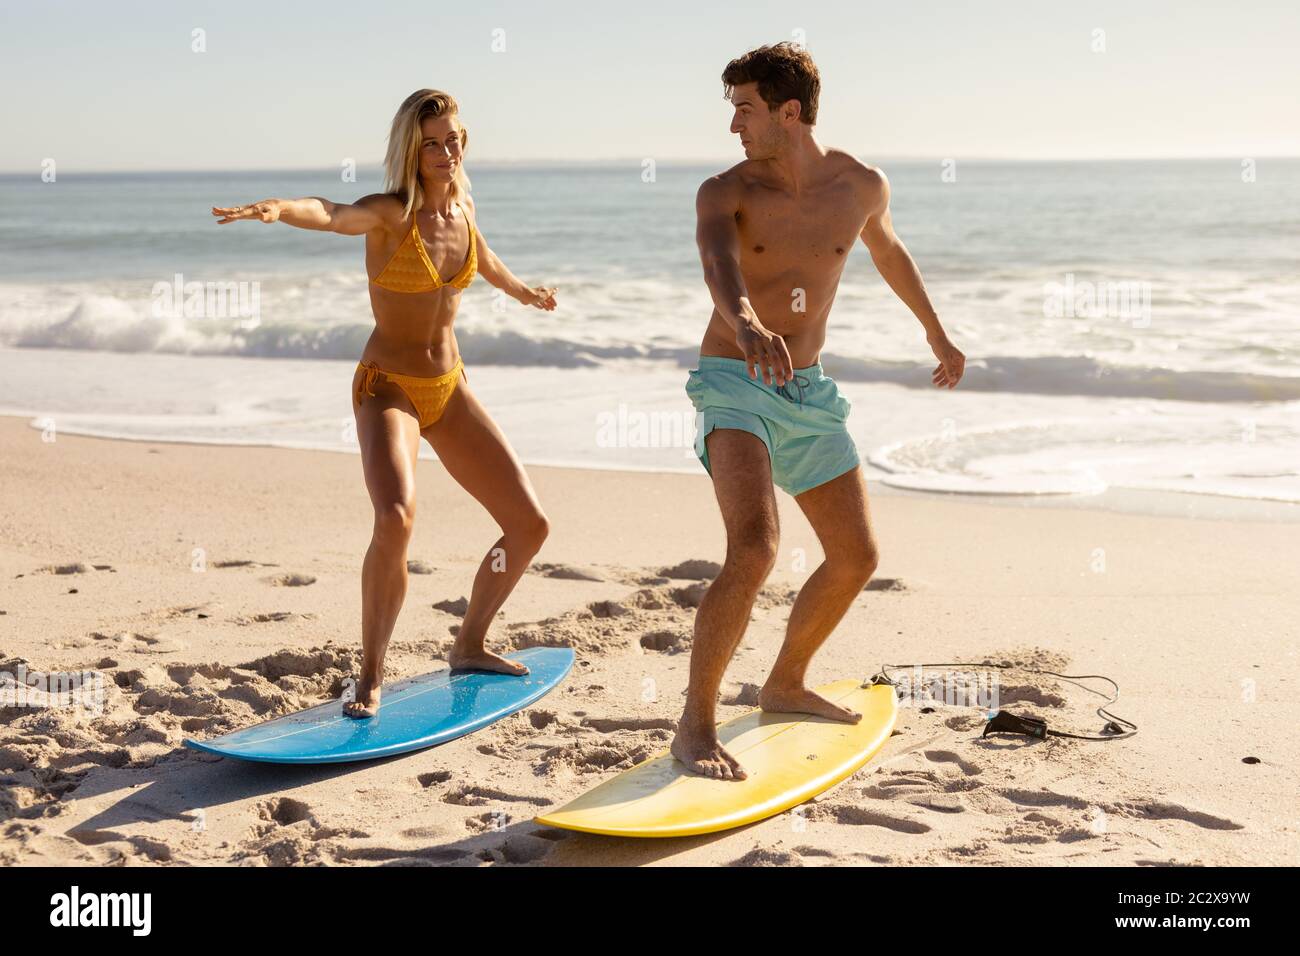 Young couple surfing on a beach Stock Photo